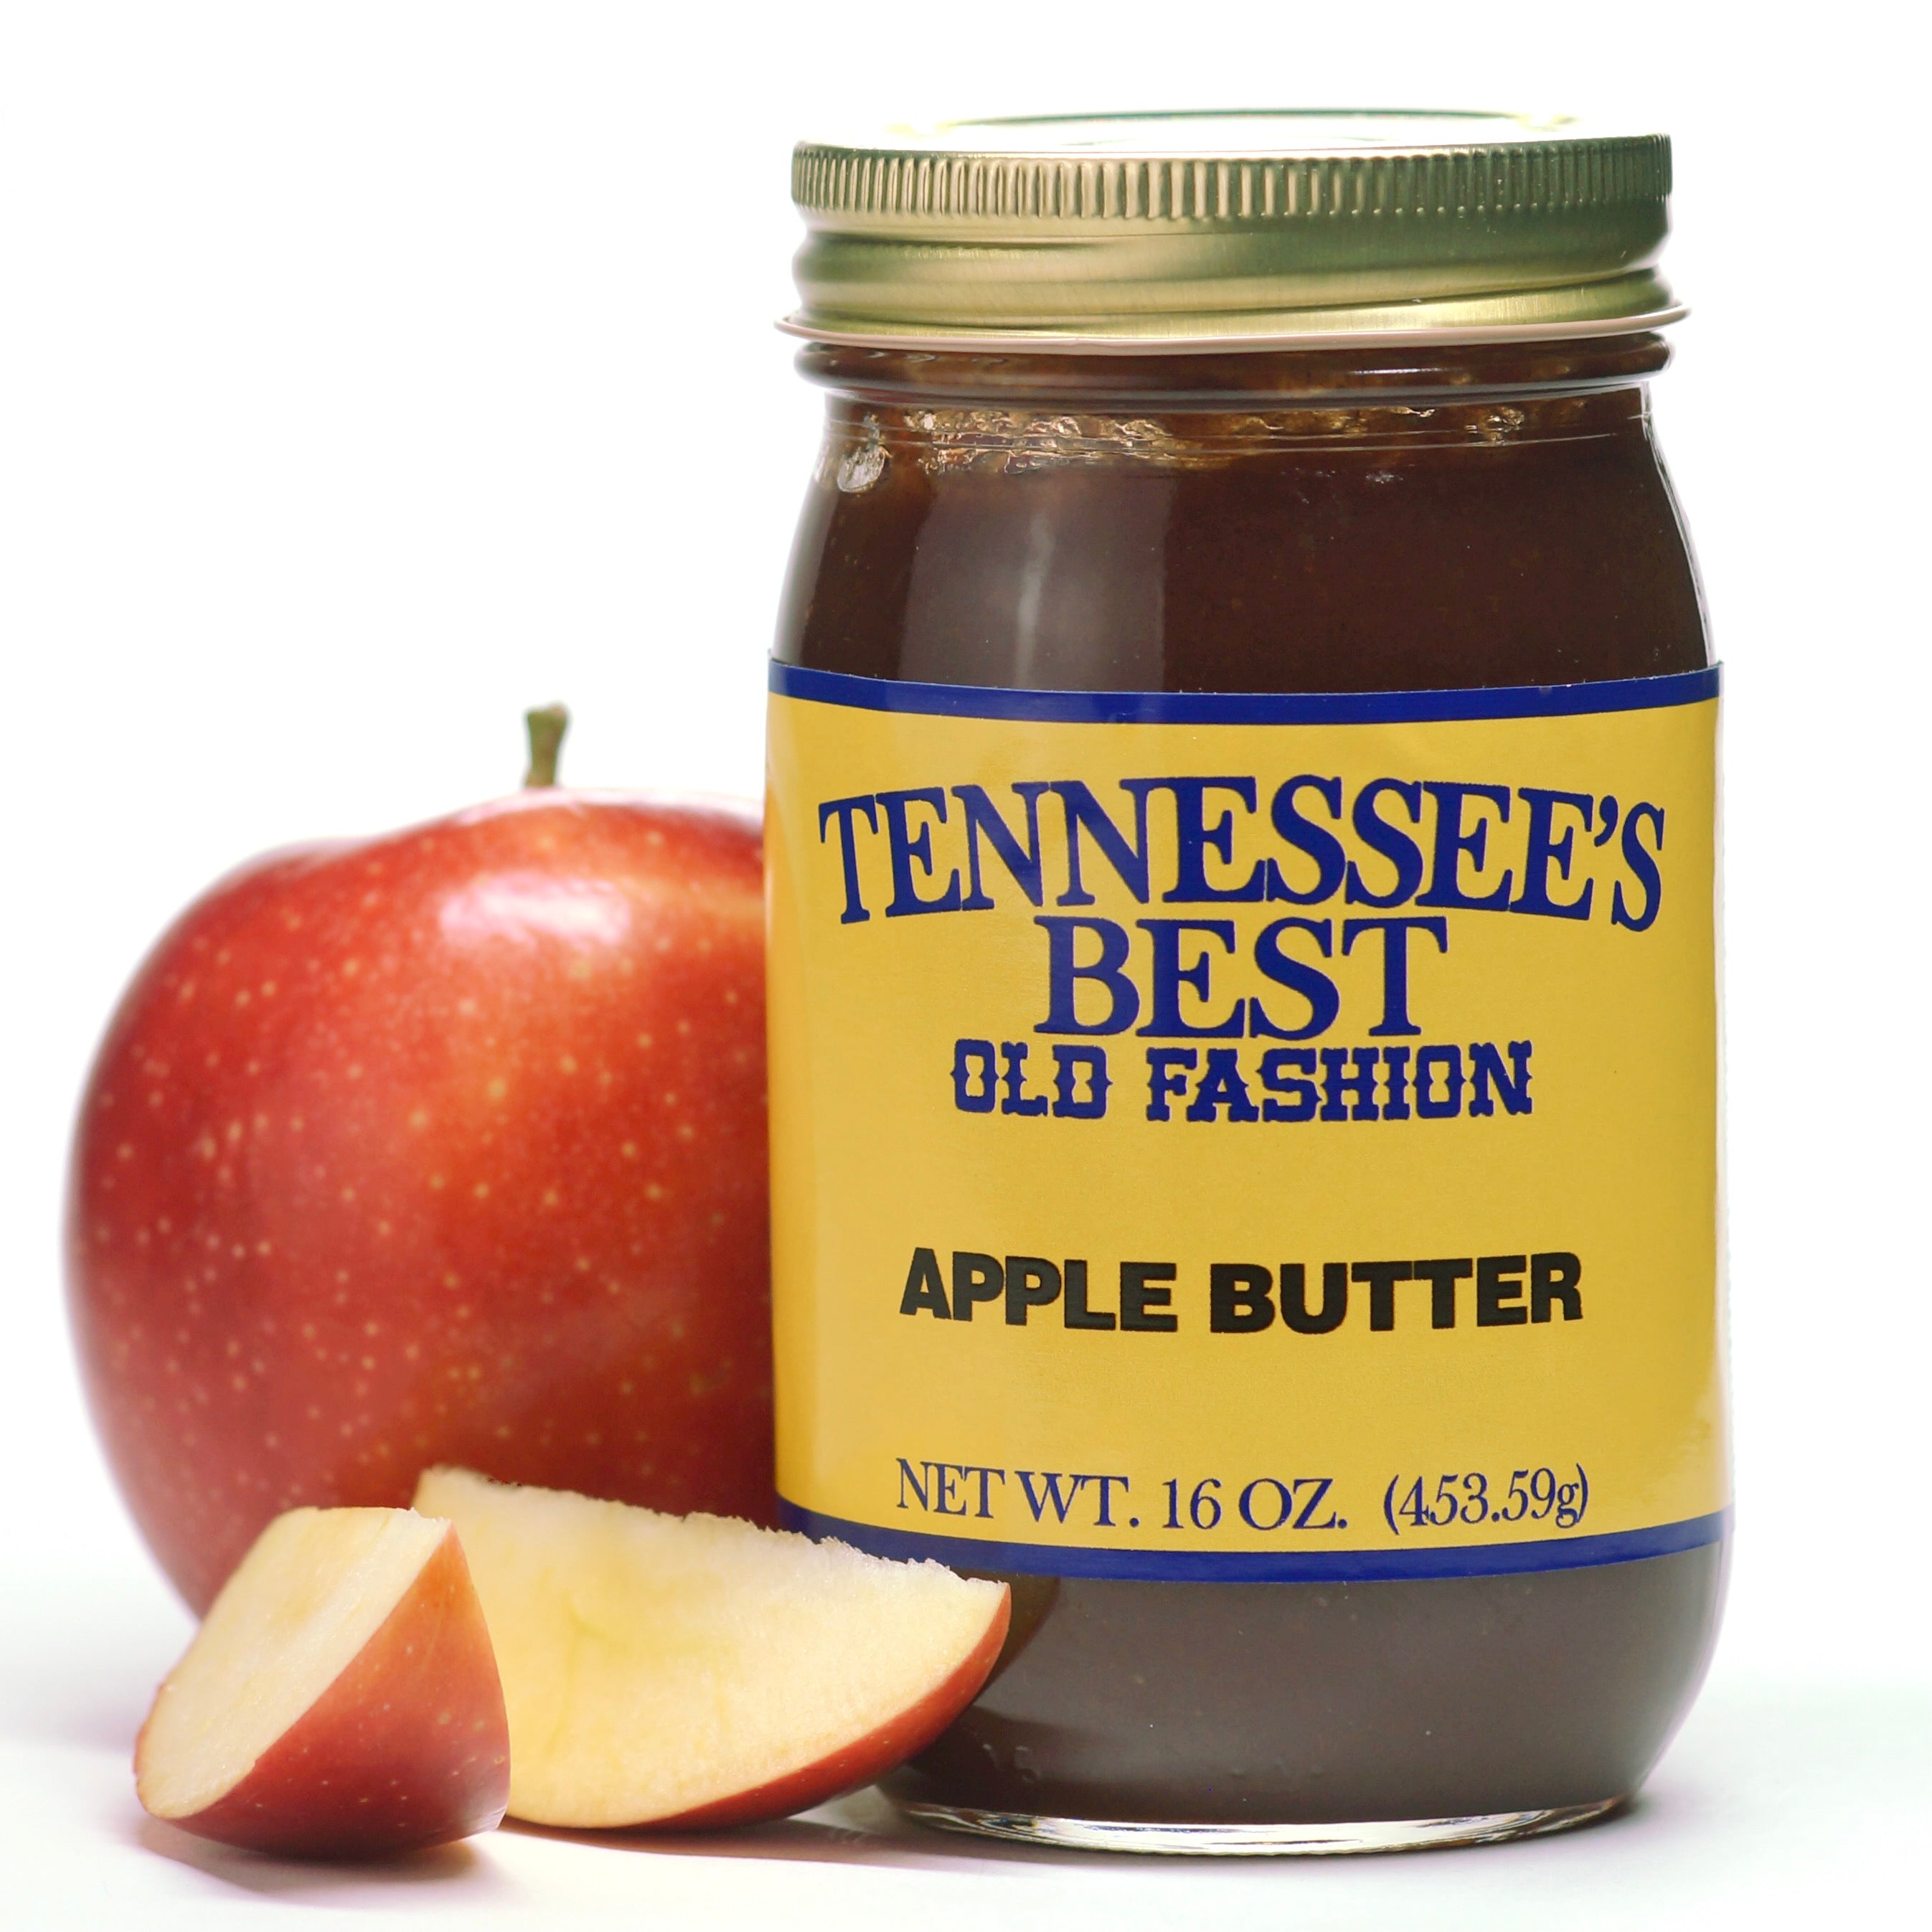 Tennessee's Best Old Fashion Style Apple Butter